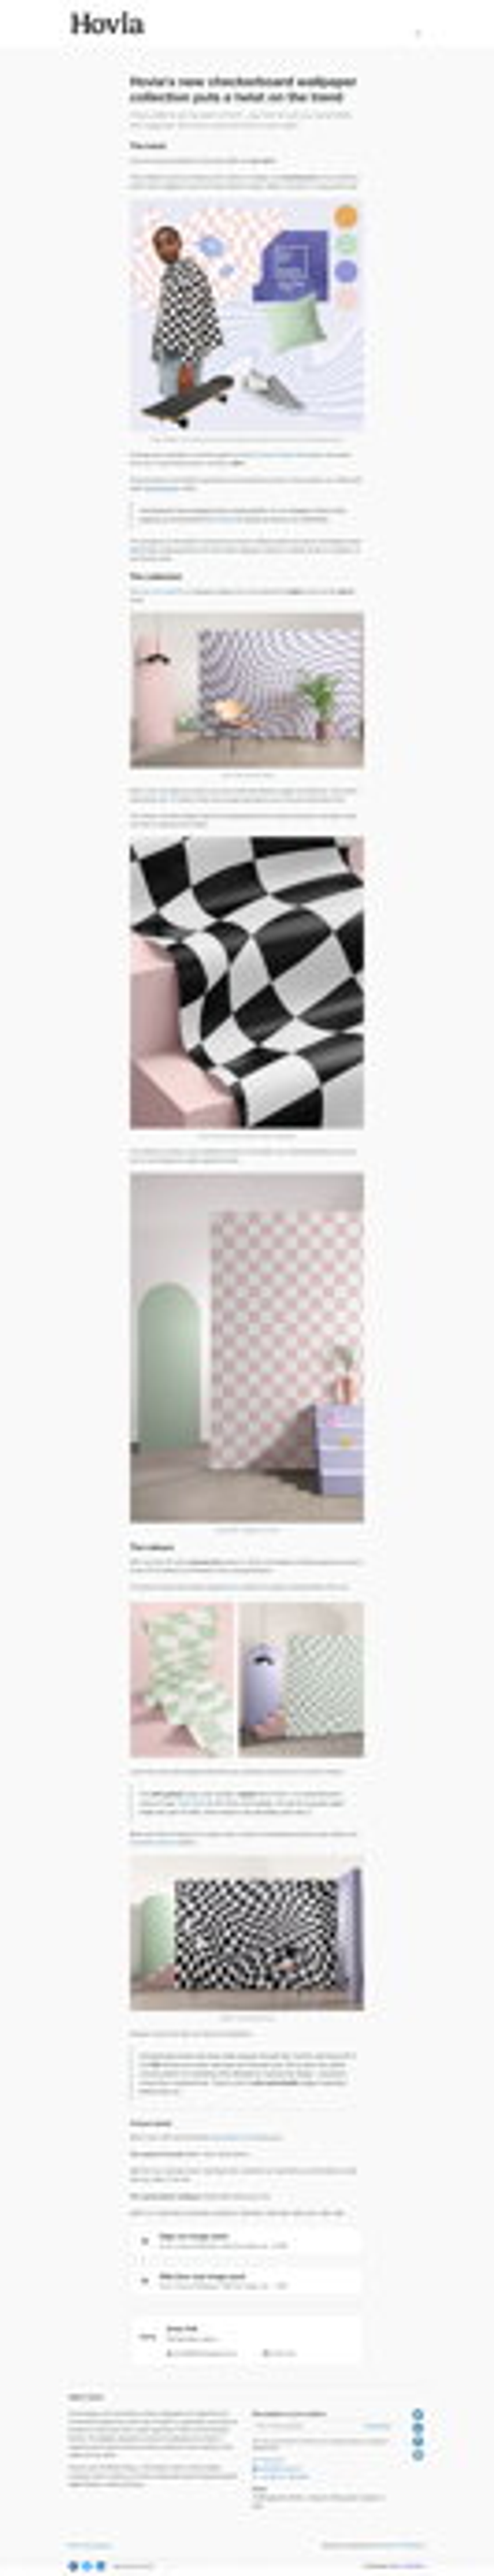 Hovia's new checkerboard wallpaper collection puts a twist on the trend